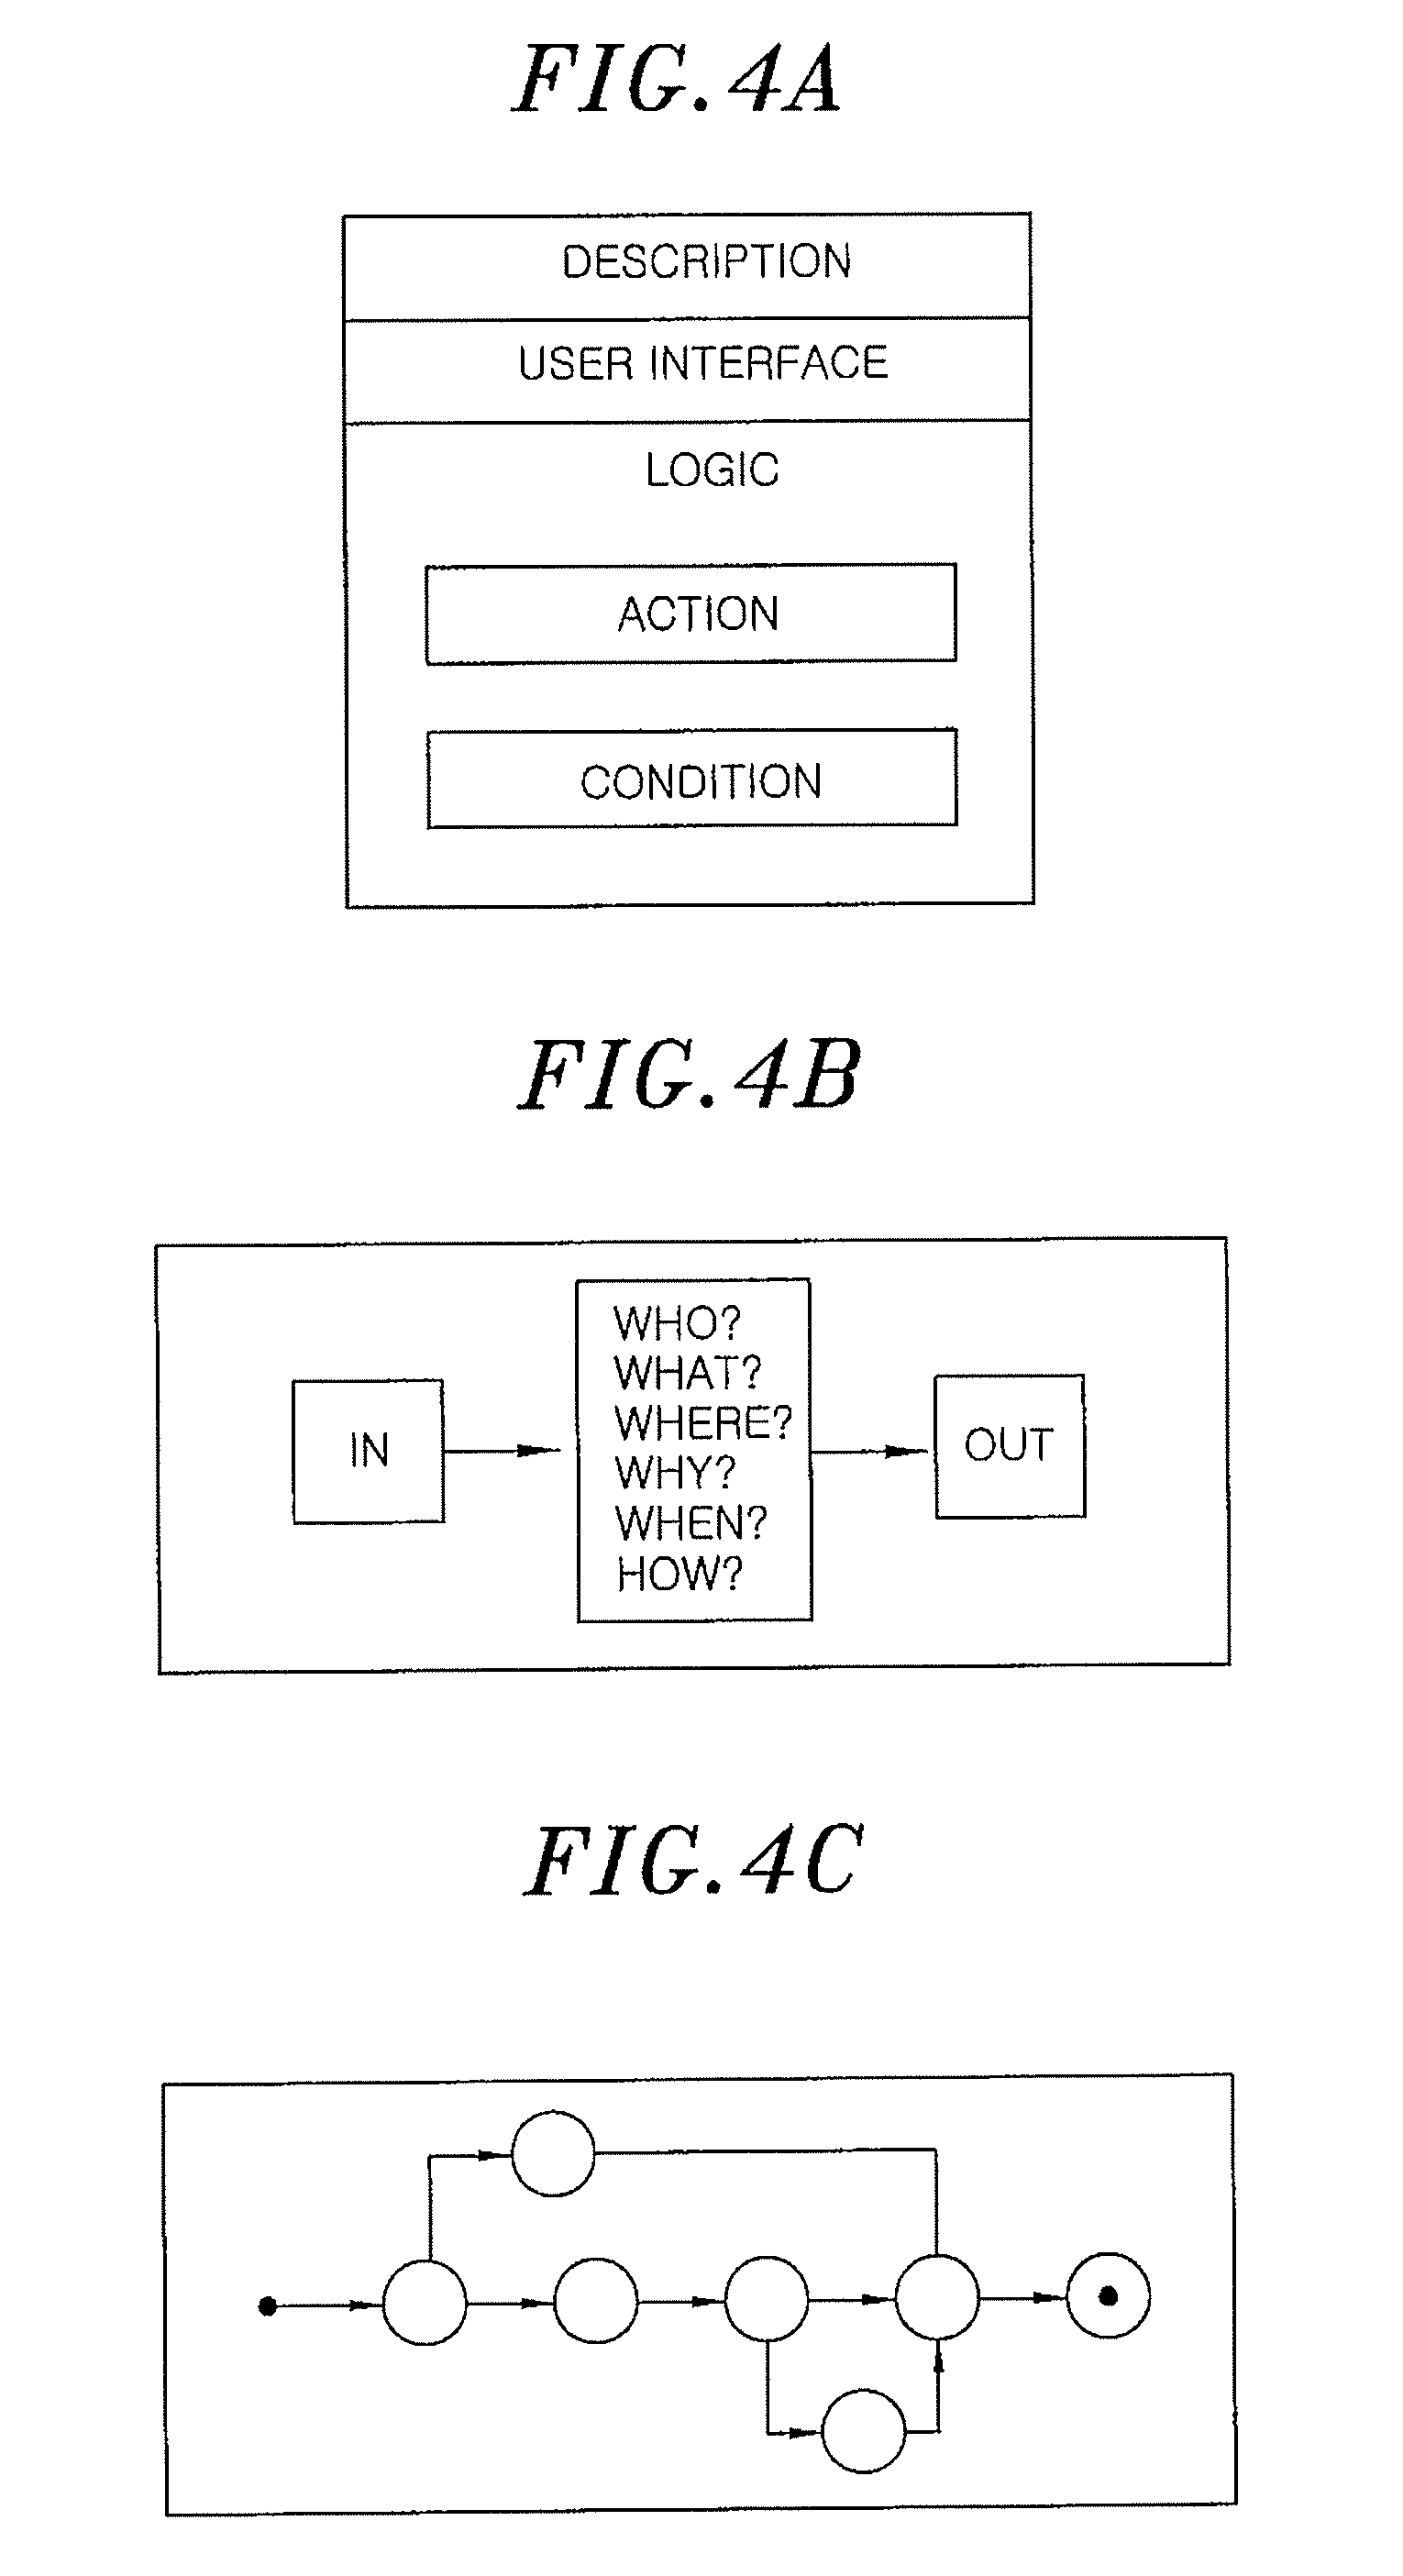 Communication terminal, service kiosk, and service providing system and method